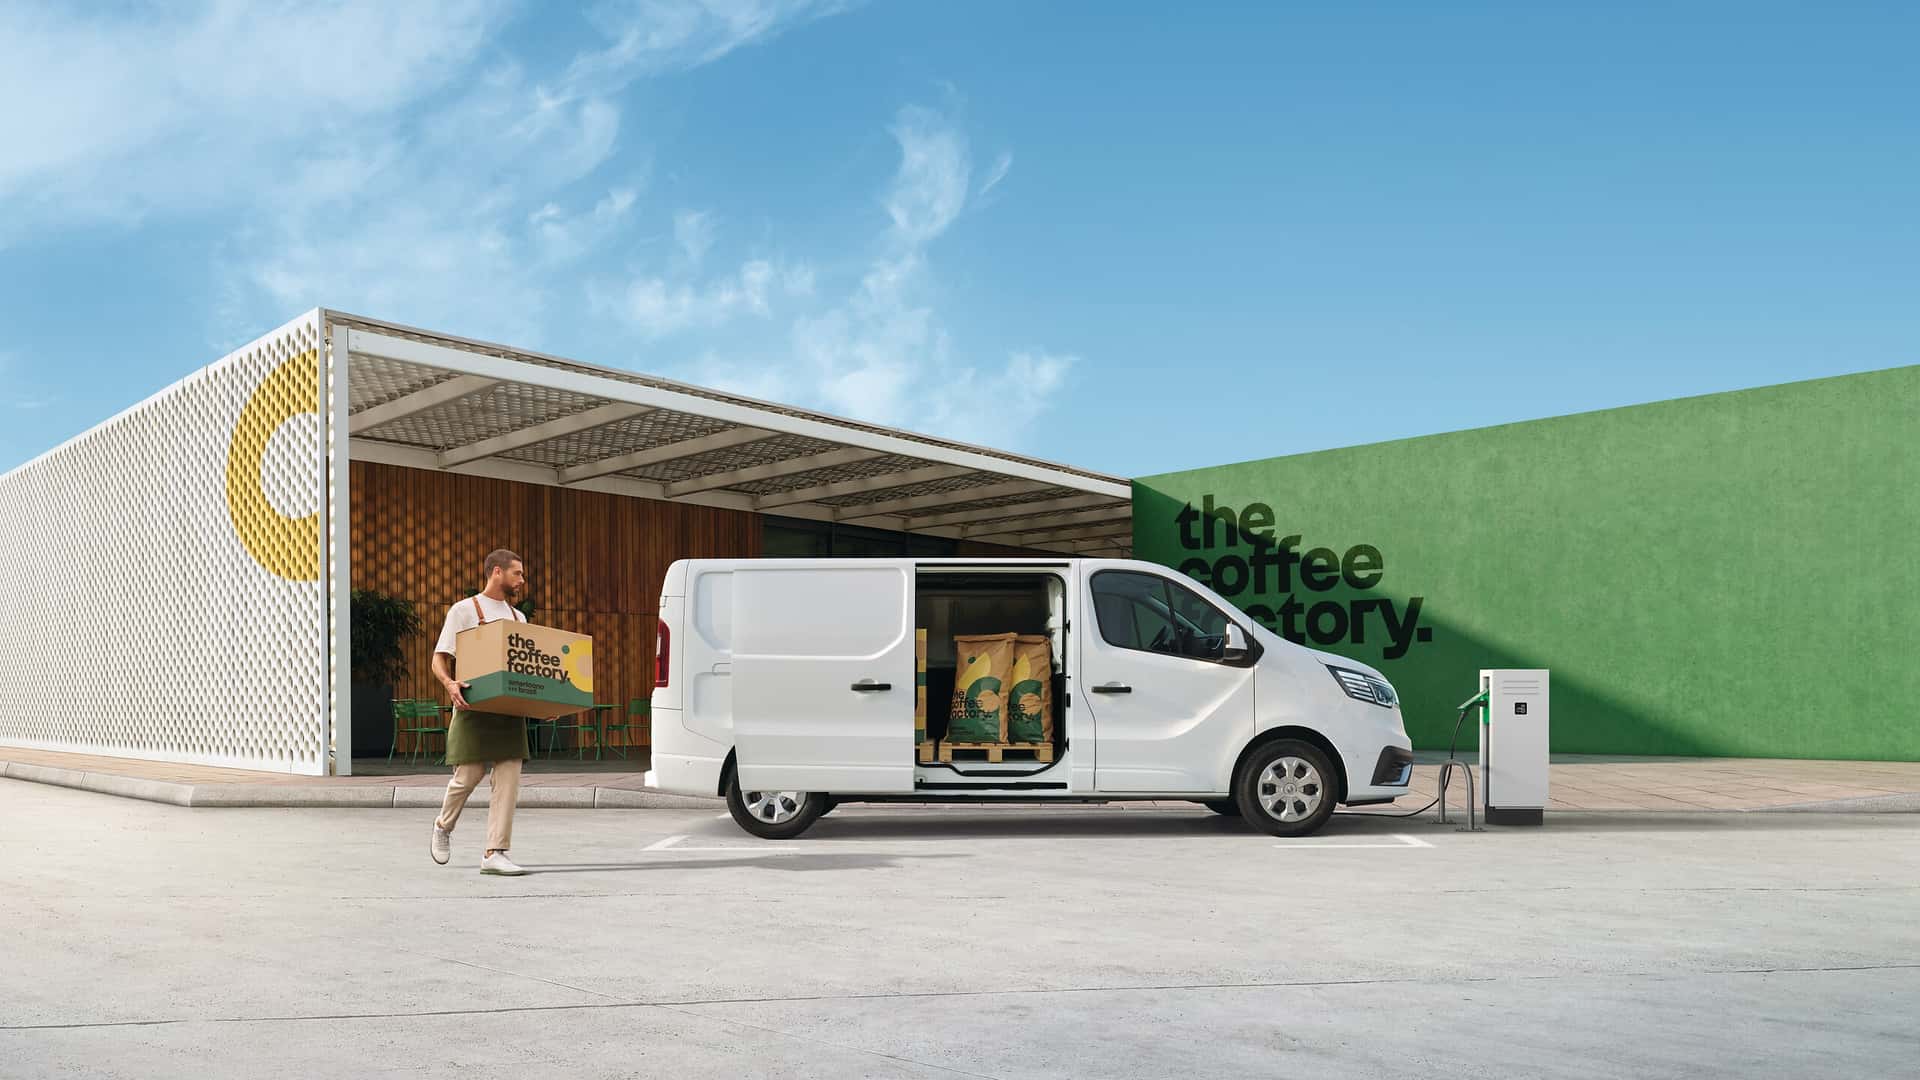 all-new renault trafic van e-tech electric debuts with 184 miles of range